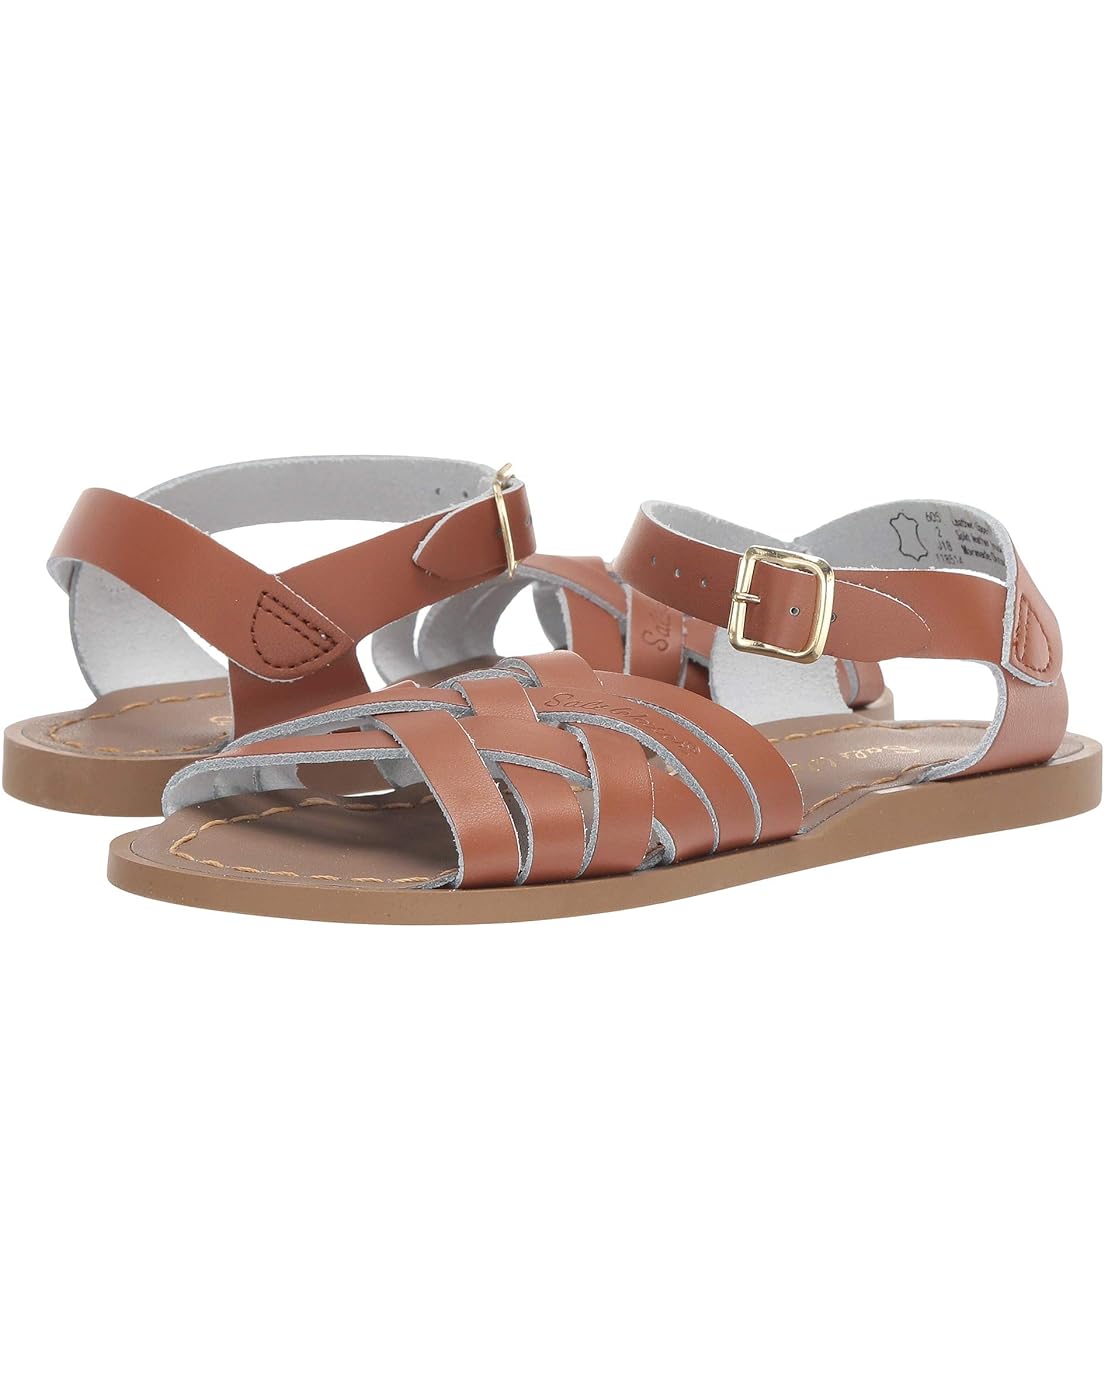 Salt Water Sandal by Hoy Shoes Retro (Toddler/Little Kid)